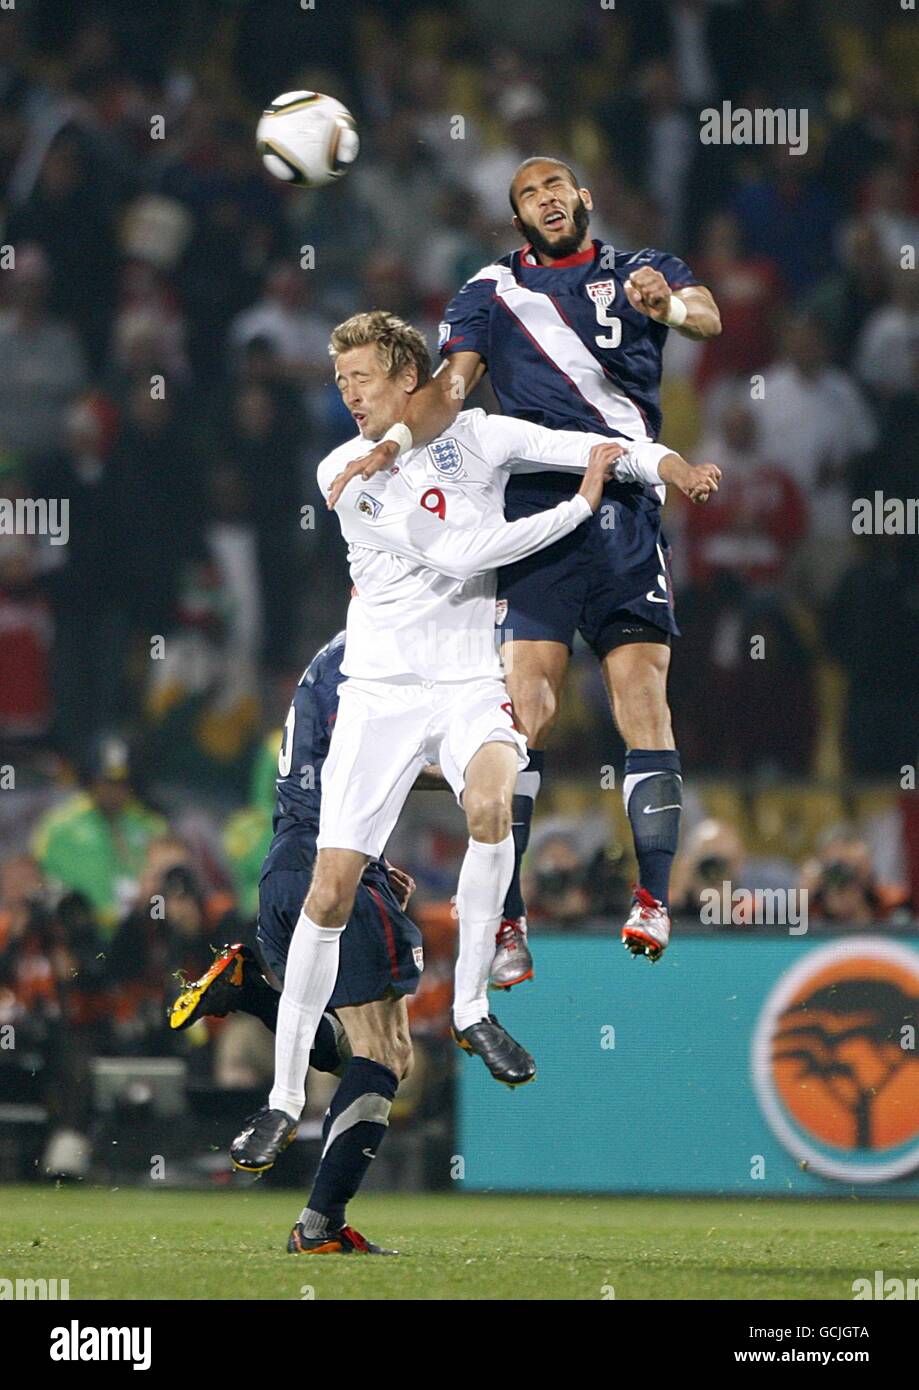 Soccer - 2010 FIFA World Cup South Africa - Group C - England v USA - Royal Bafokeng Stadium. USA's Oguchi Onyewu (right) and England's Peter Crouch (left) battle for the ball Stock Photo